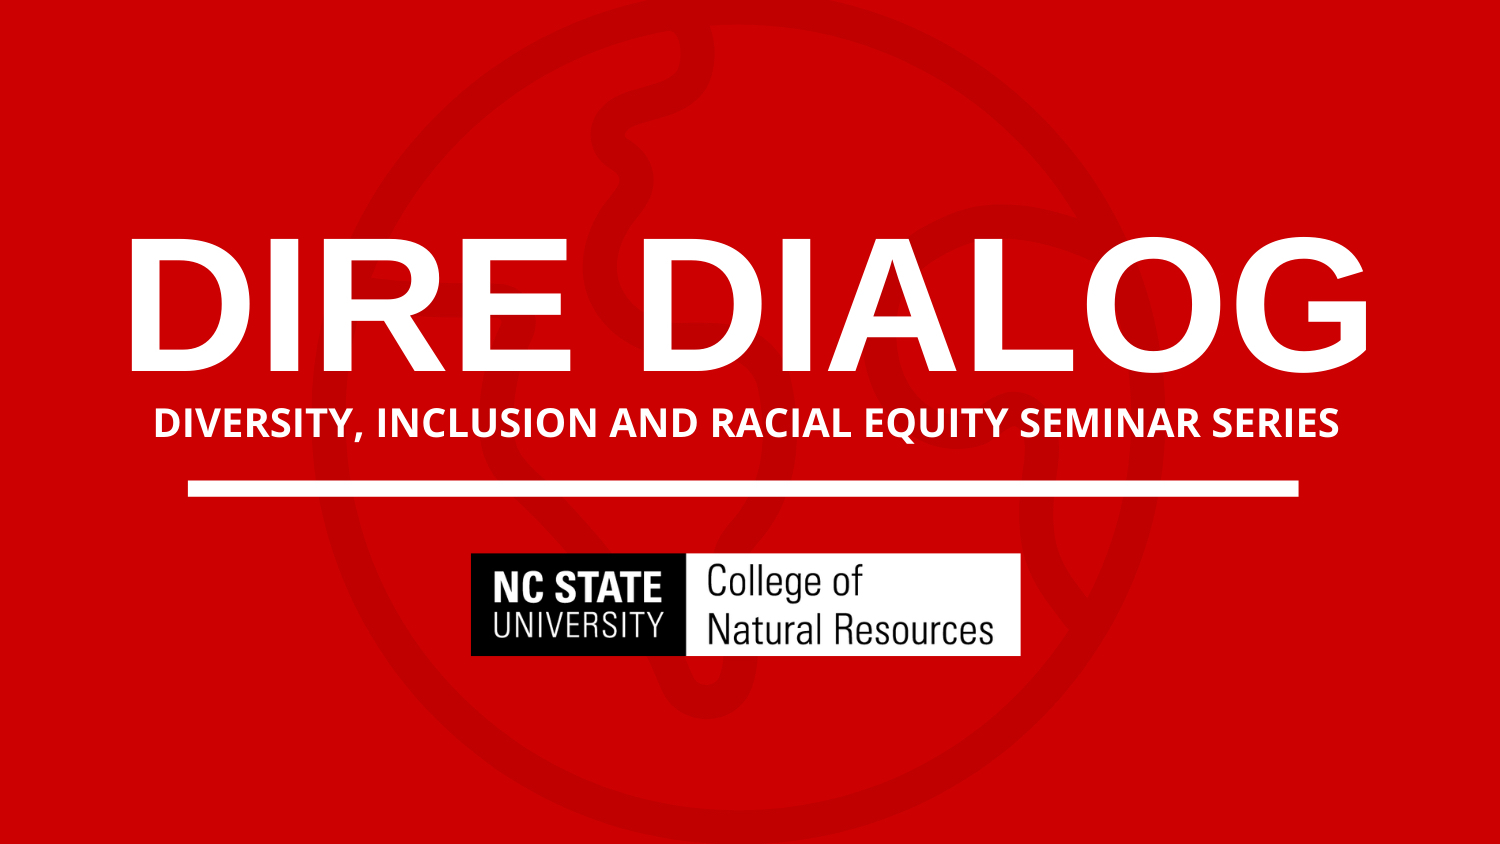 Dire Dialog - Latino Outdoors Founder Jose Gonzalez to Lead DIRE Dialog Seminar - College of Natural Resources at NC State University